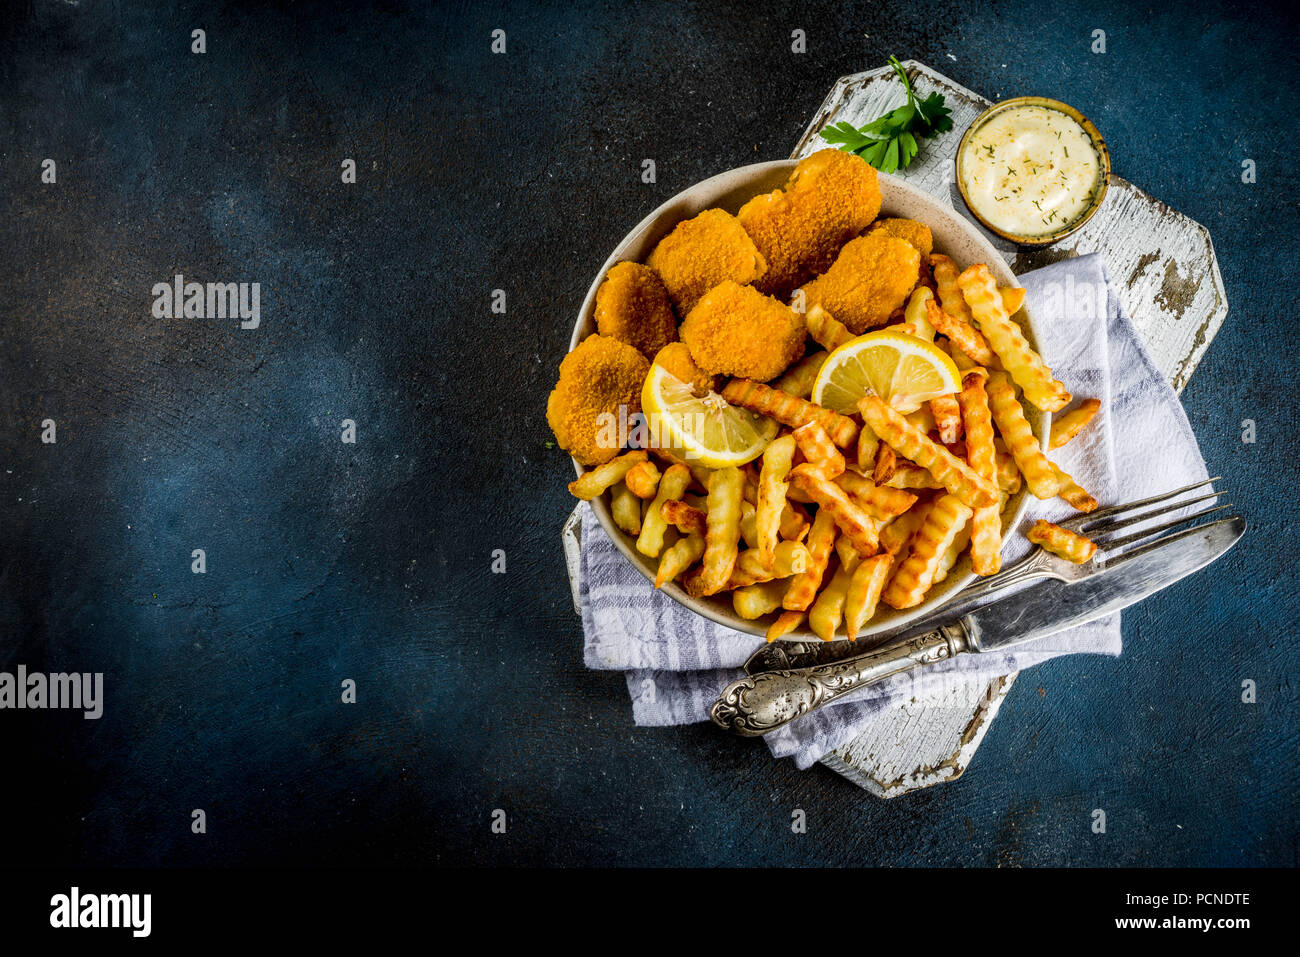 English traditional fast food, junk food, British dish Fish and chips with tartar sauce, lemon and greens, on a dark blue background, copy space above Stock Photo